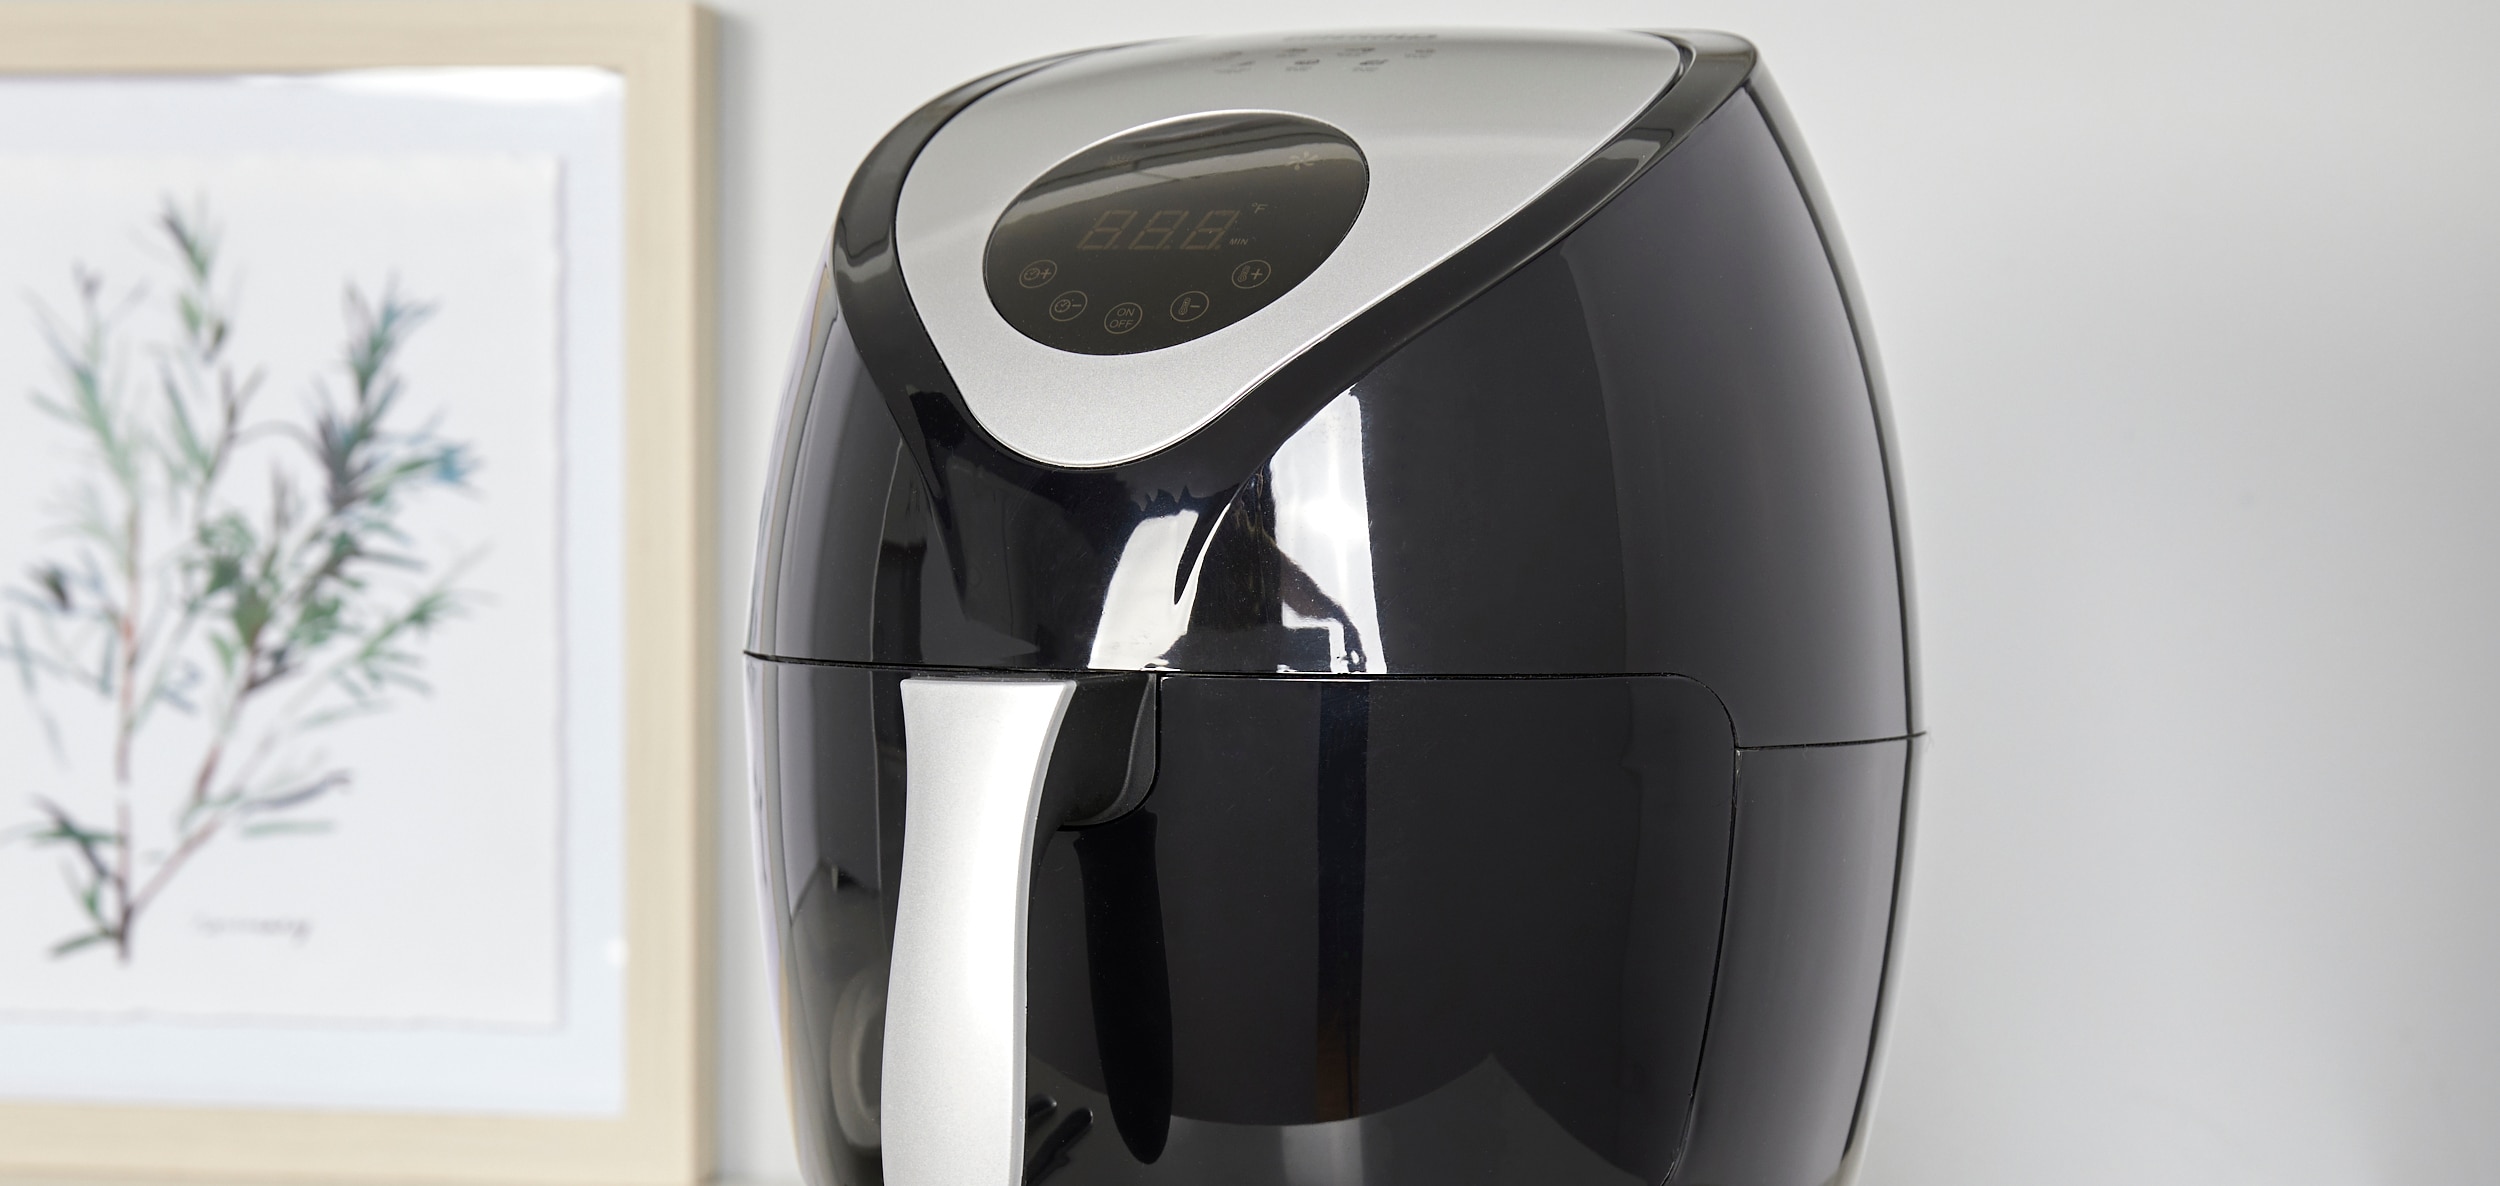  Emerald Air Fryer With Rapid Air Technology 3.2L Capacity  (1801) : Home & Kitchen